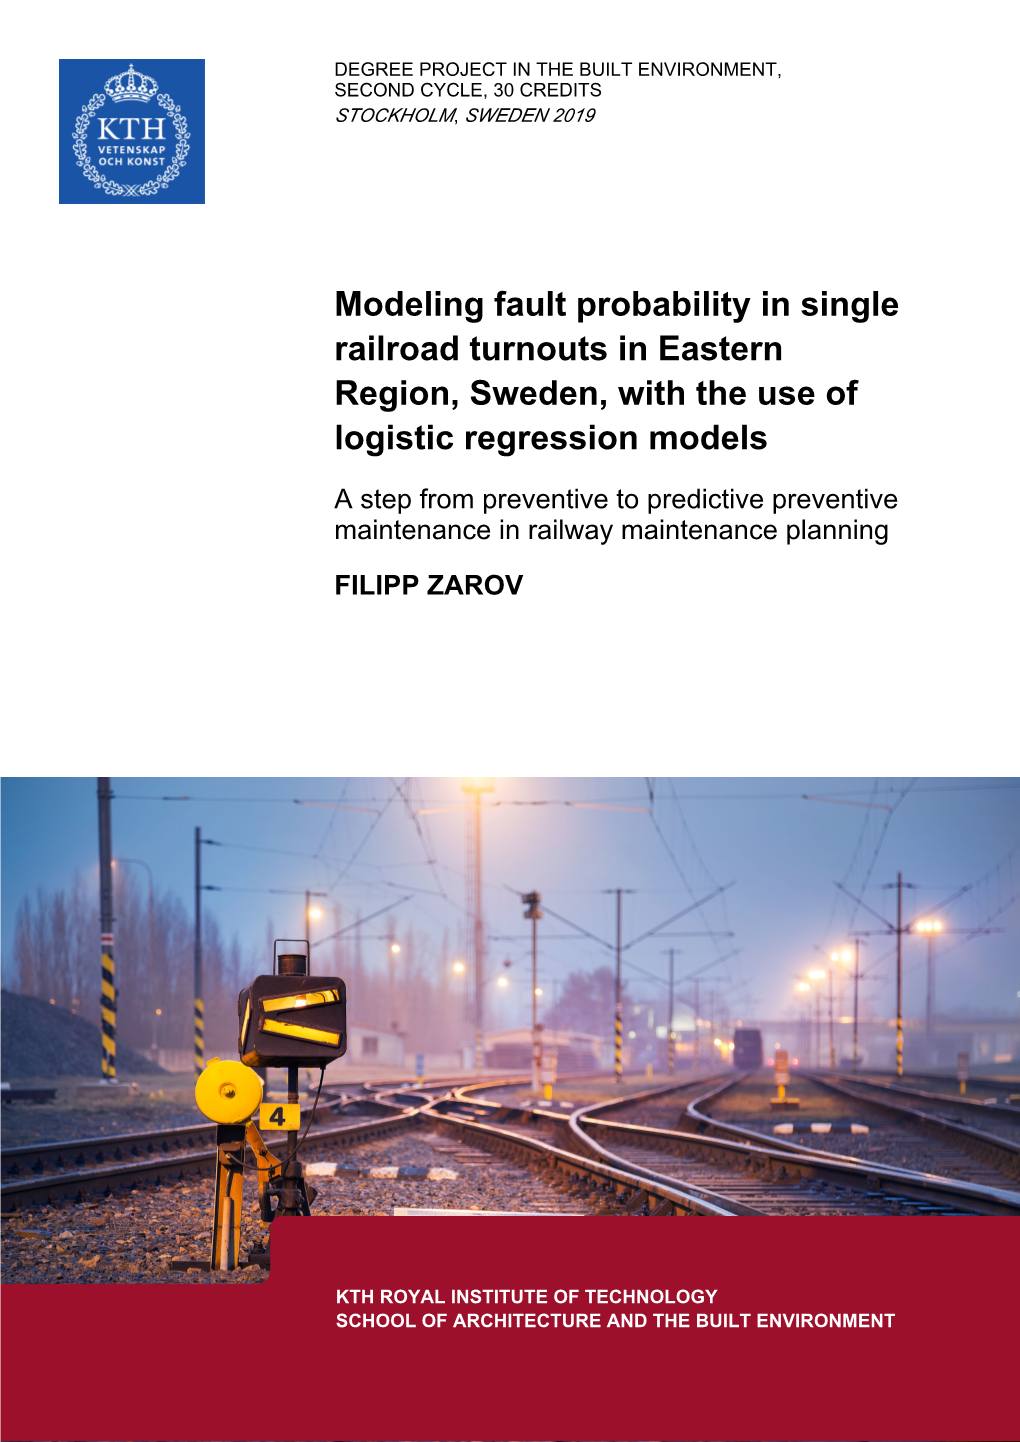 Modeling Fault Probability in Single Railroad Turnouts in Eastern Region, Sweden, with the Use of Logistic Regression Models